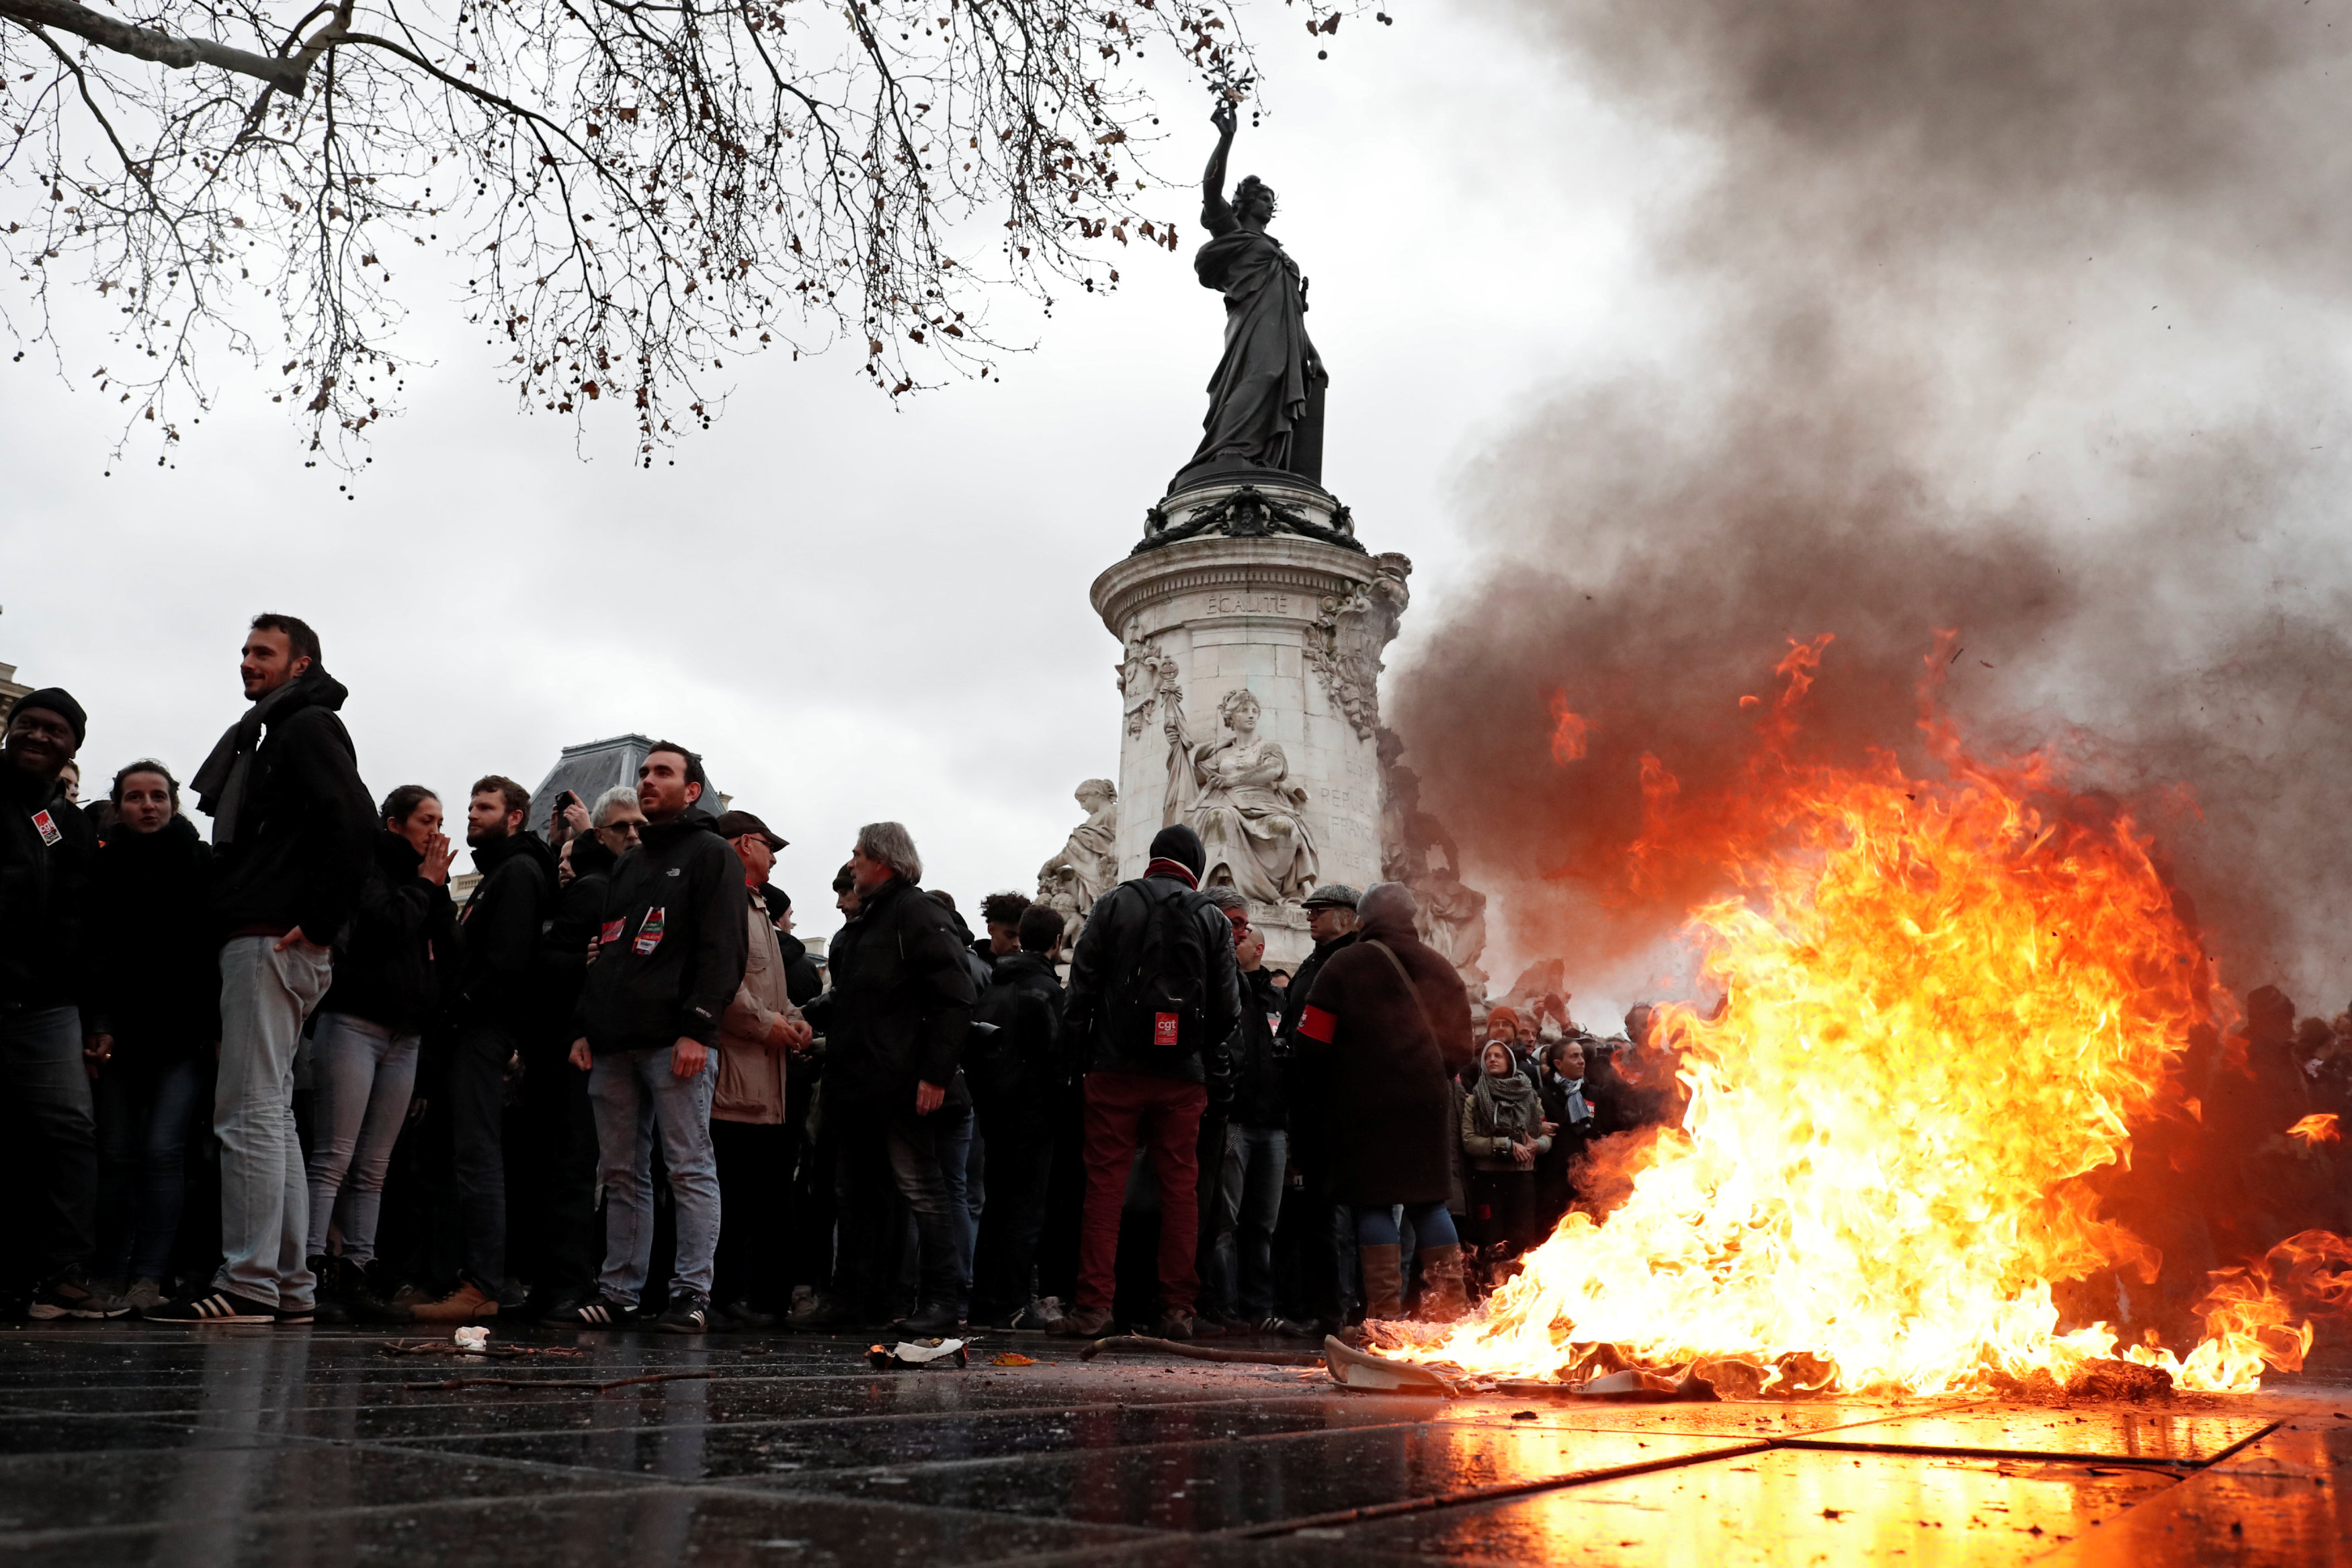 2018-12-07T121200Z_521656195_RC1730656A20_RTRMADP_3_FRANCE-PROTESTS-STUDENTS